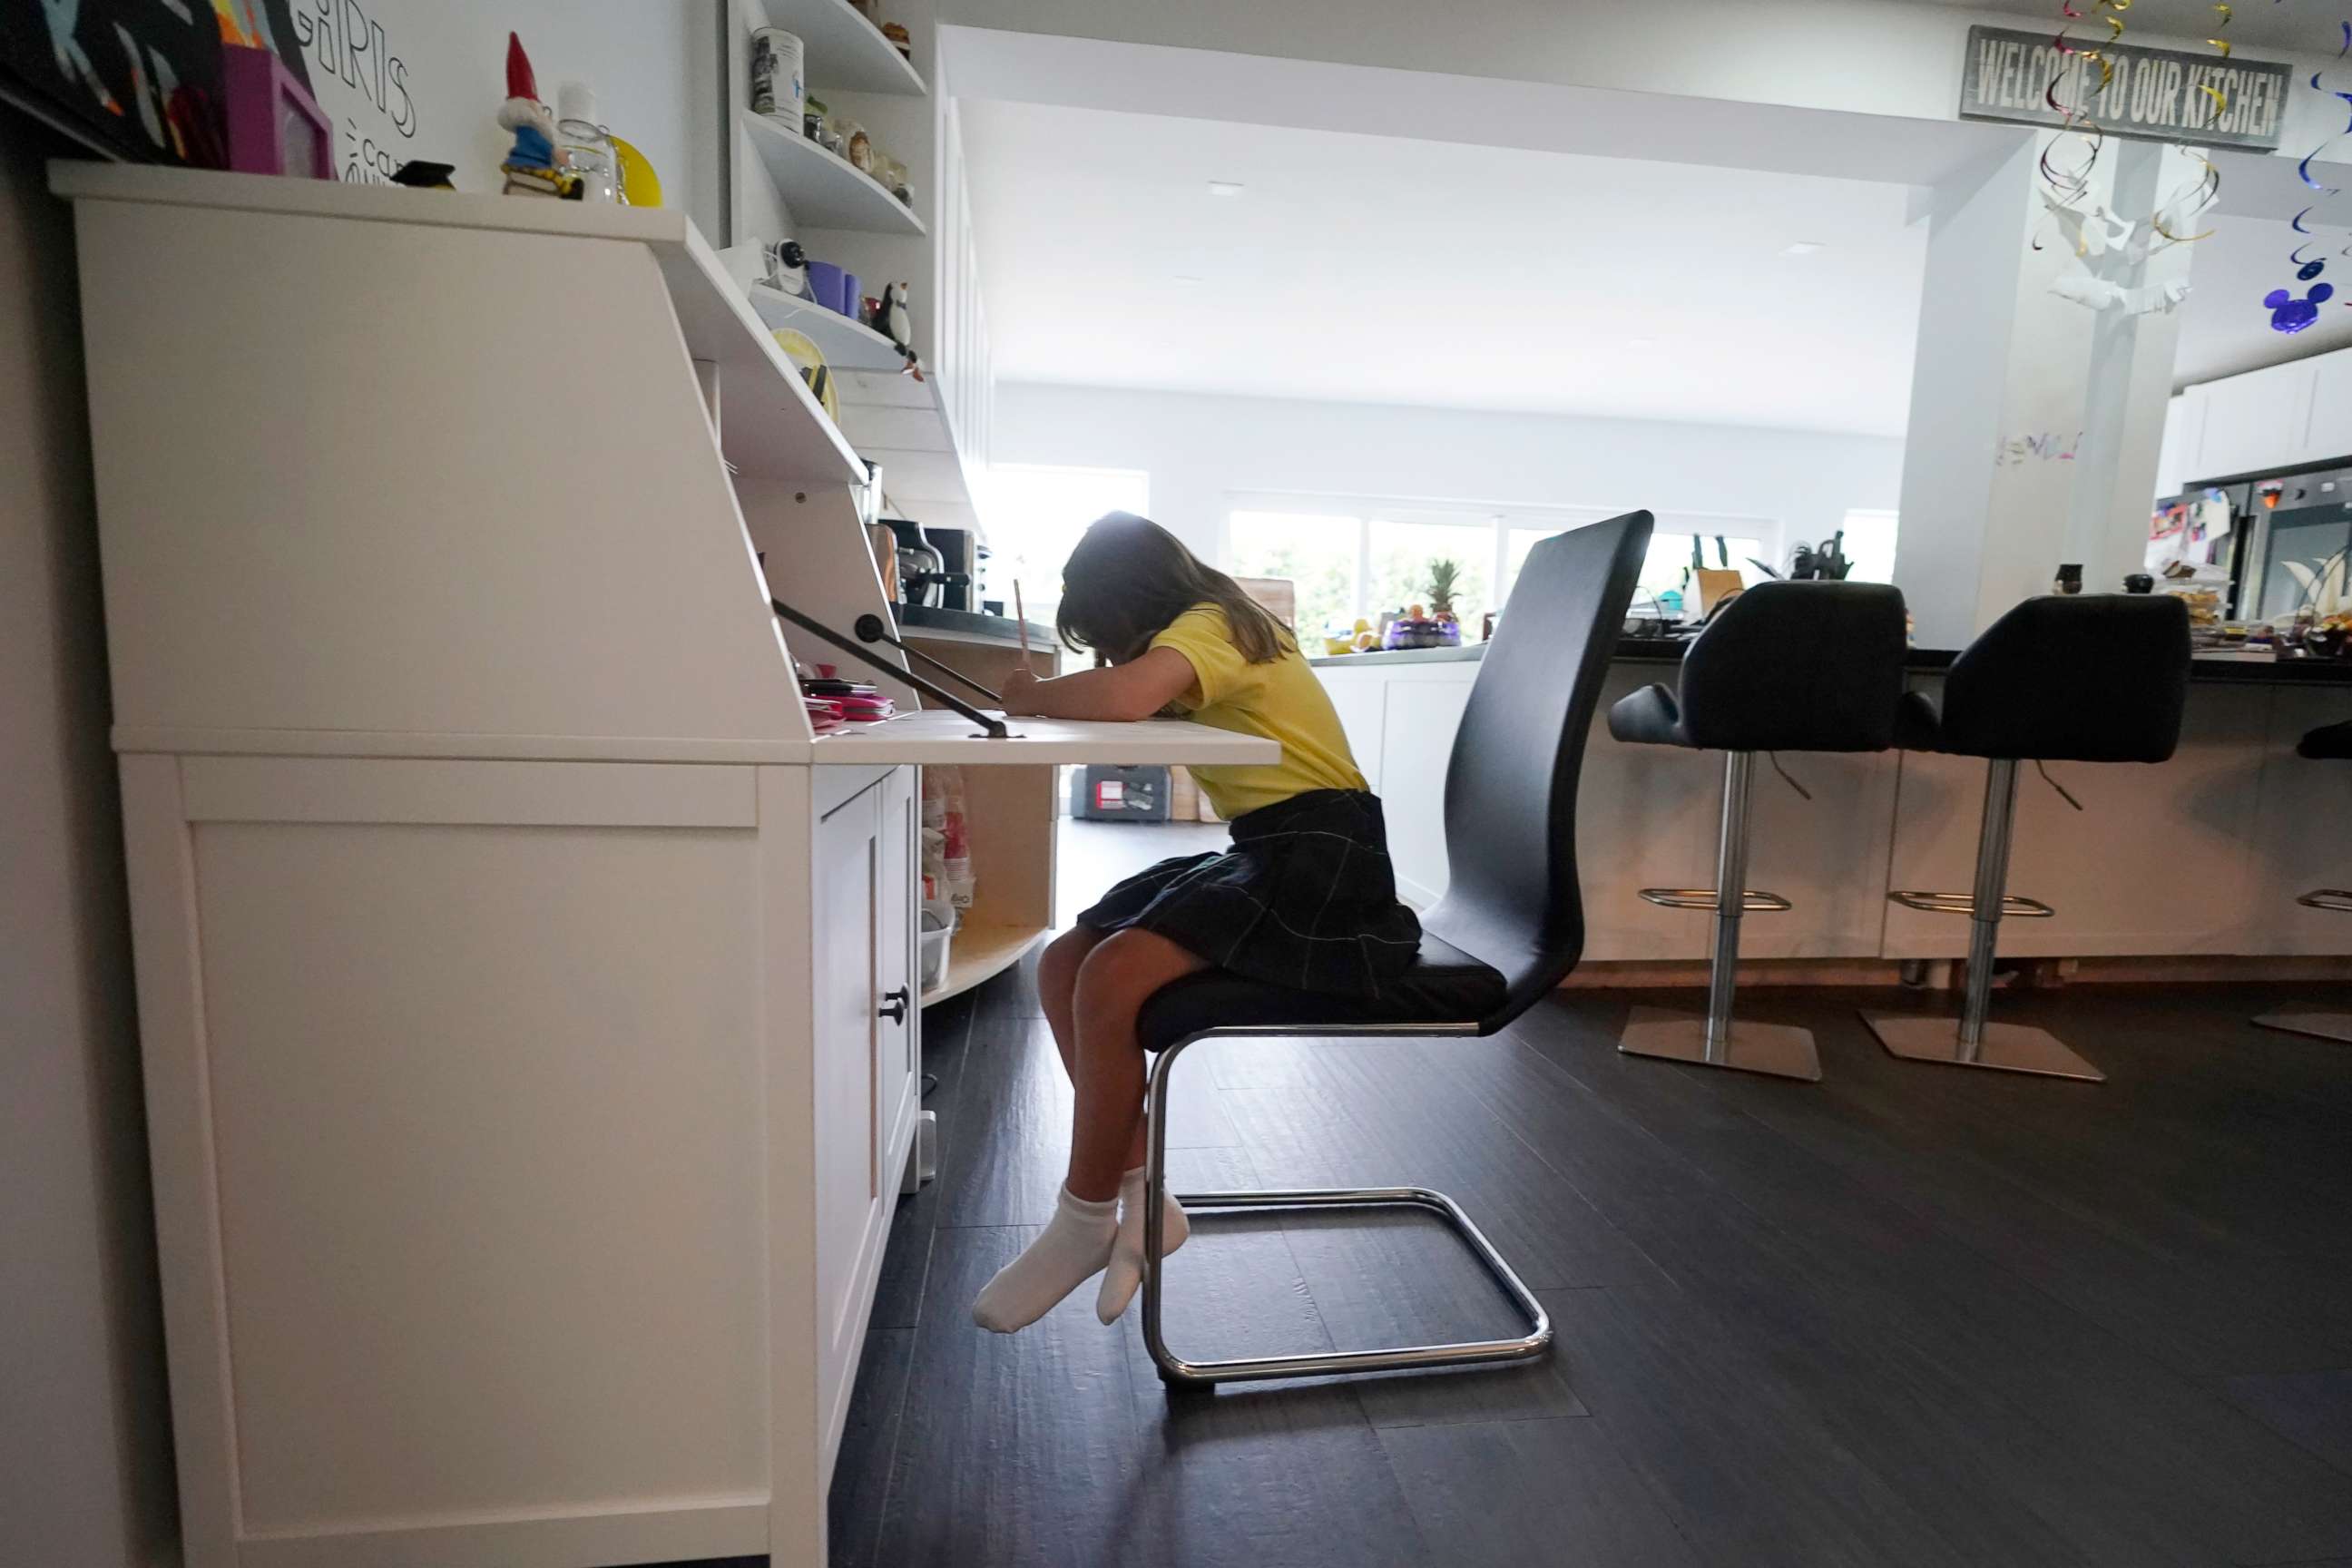 PHOTO: A student works on a writing exercise from remote learning at her home in North Miami Beach, Fla. Oct. 1, 2020.